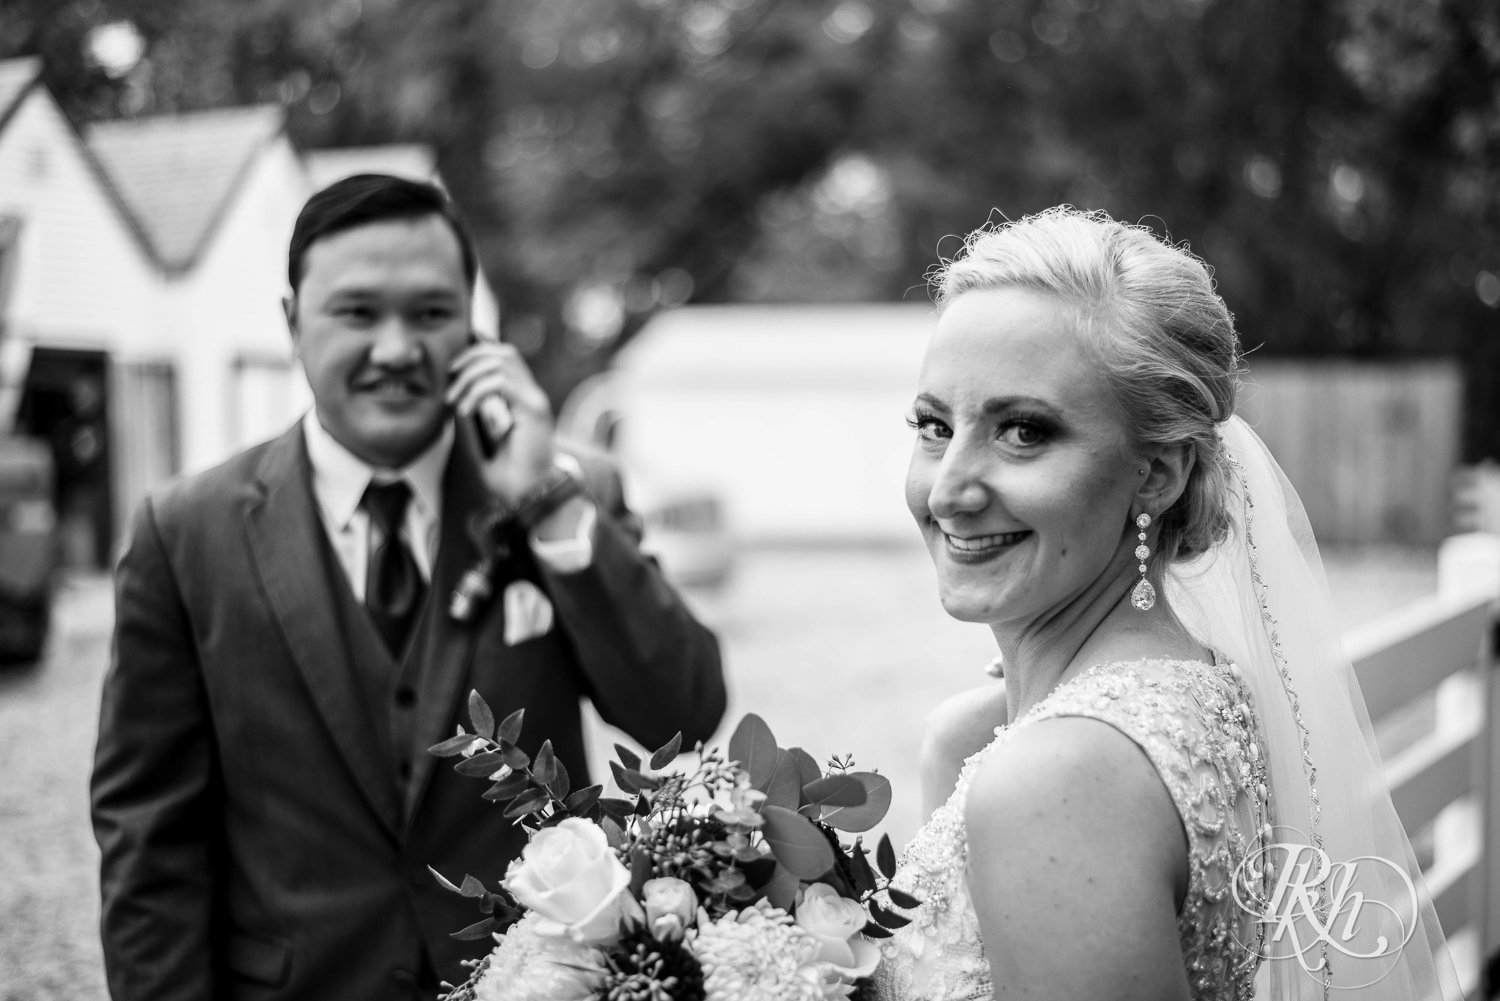 Bride and groom smile on rainy day wedding at Green Acres Event Center in Eden Prairie, Minnesota.